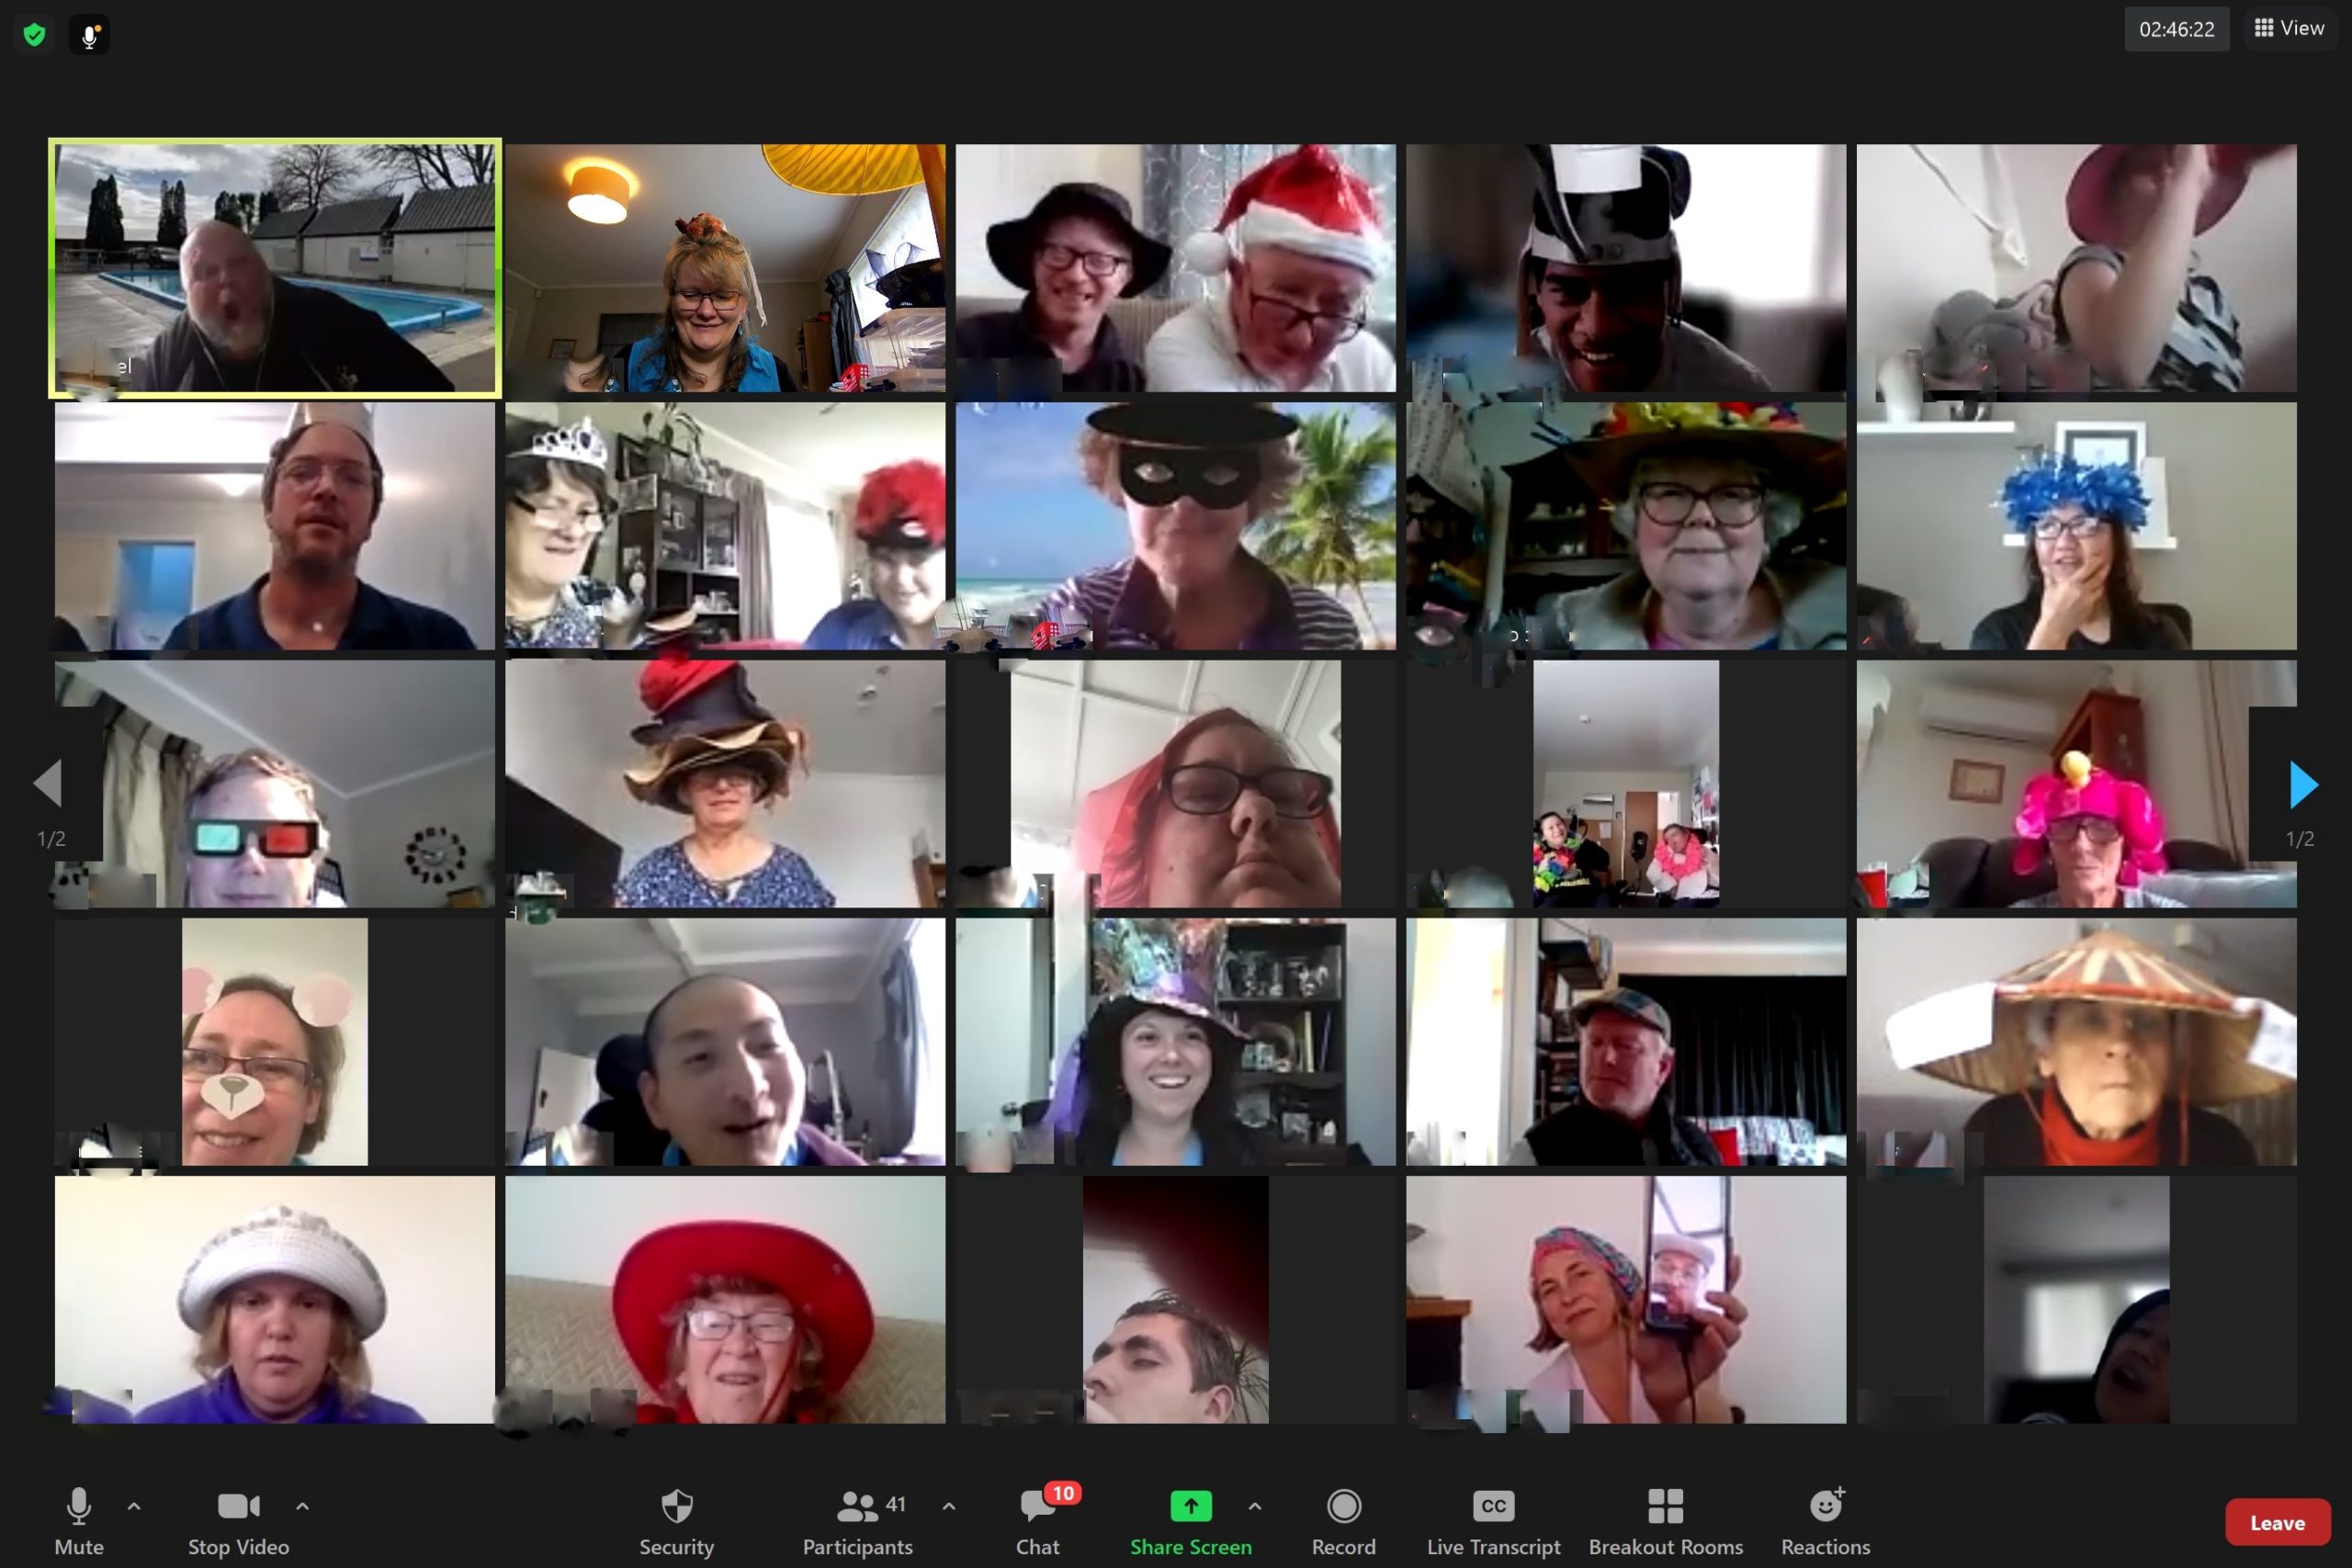 Zoom photo from previous online camp - everyone's wearing crazy hats